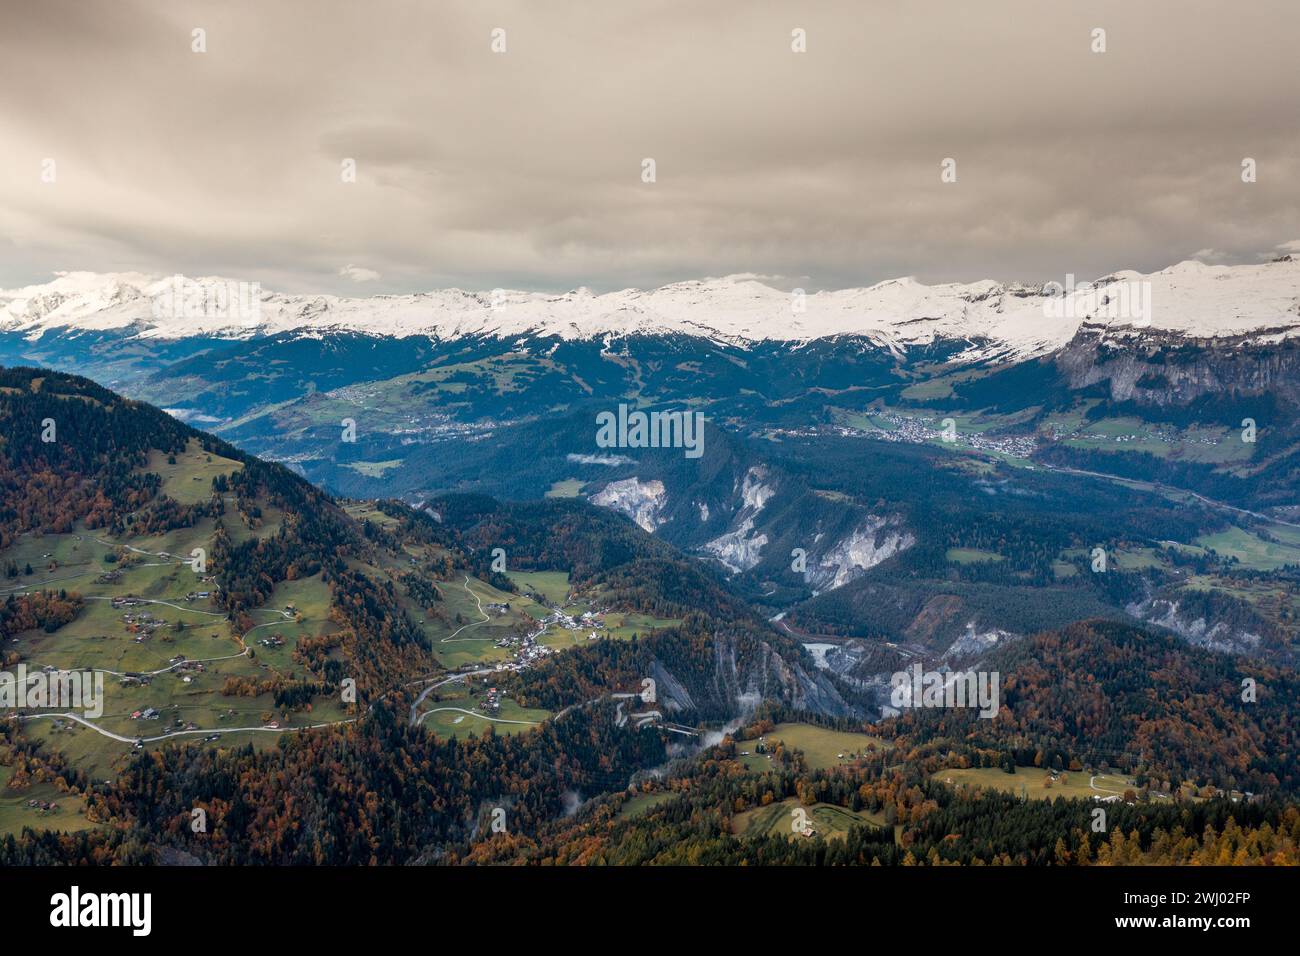 Mountain landscape in the Swiss Alps with snow-capped peaks and autum color forest Stock Photo